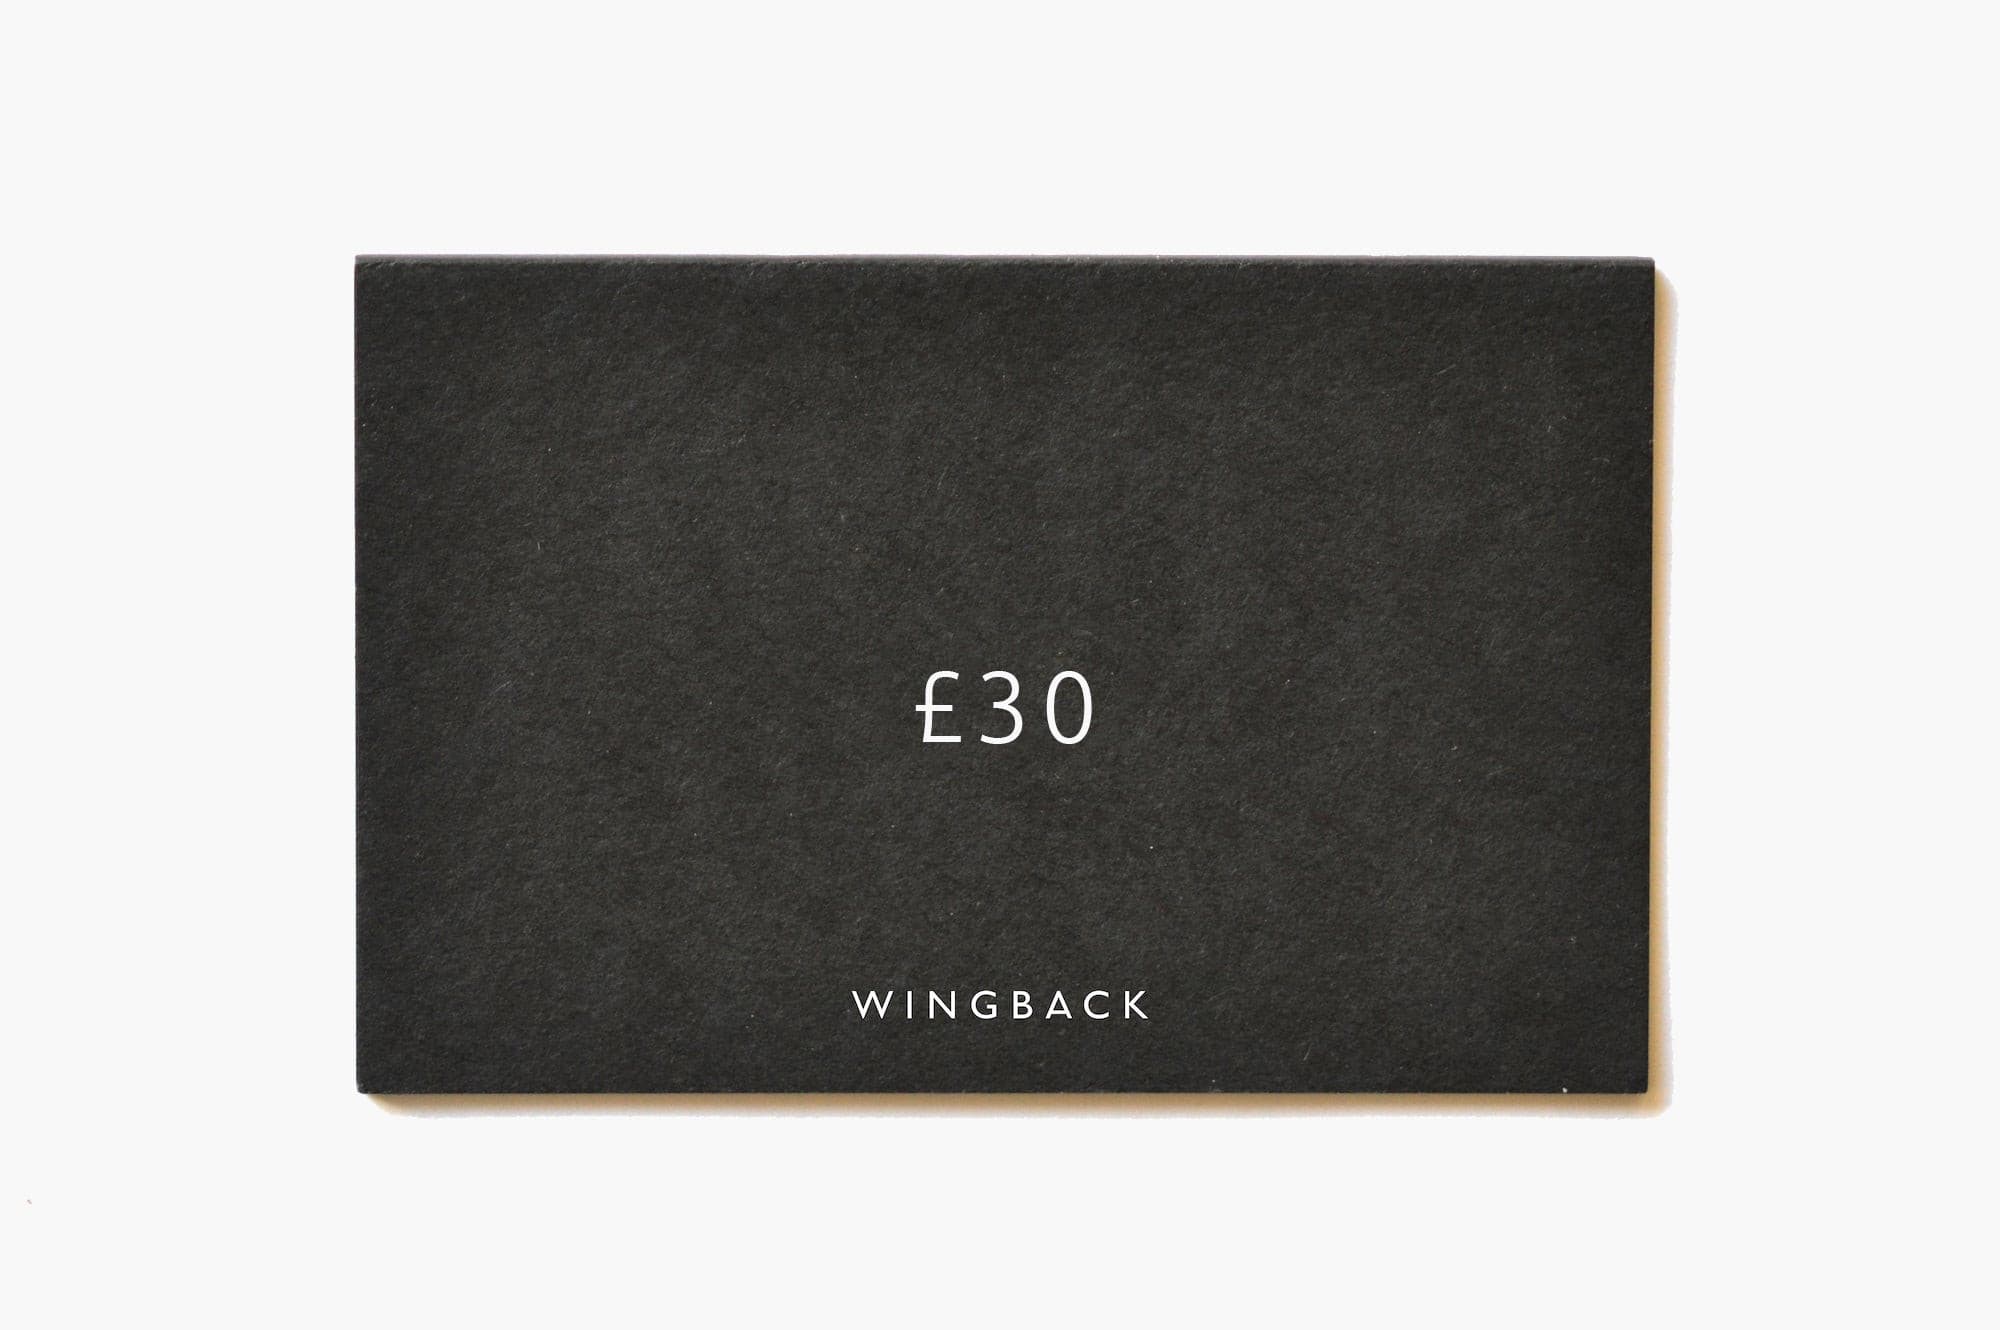 £25+ Gift Card made in England by Wingback.